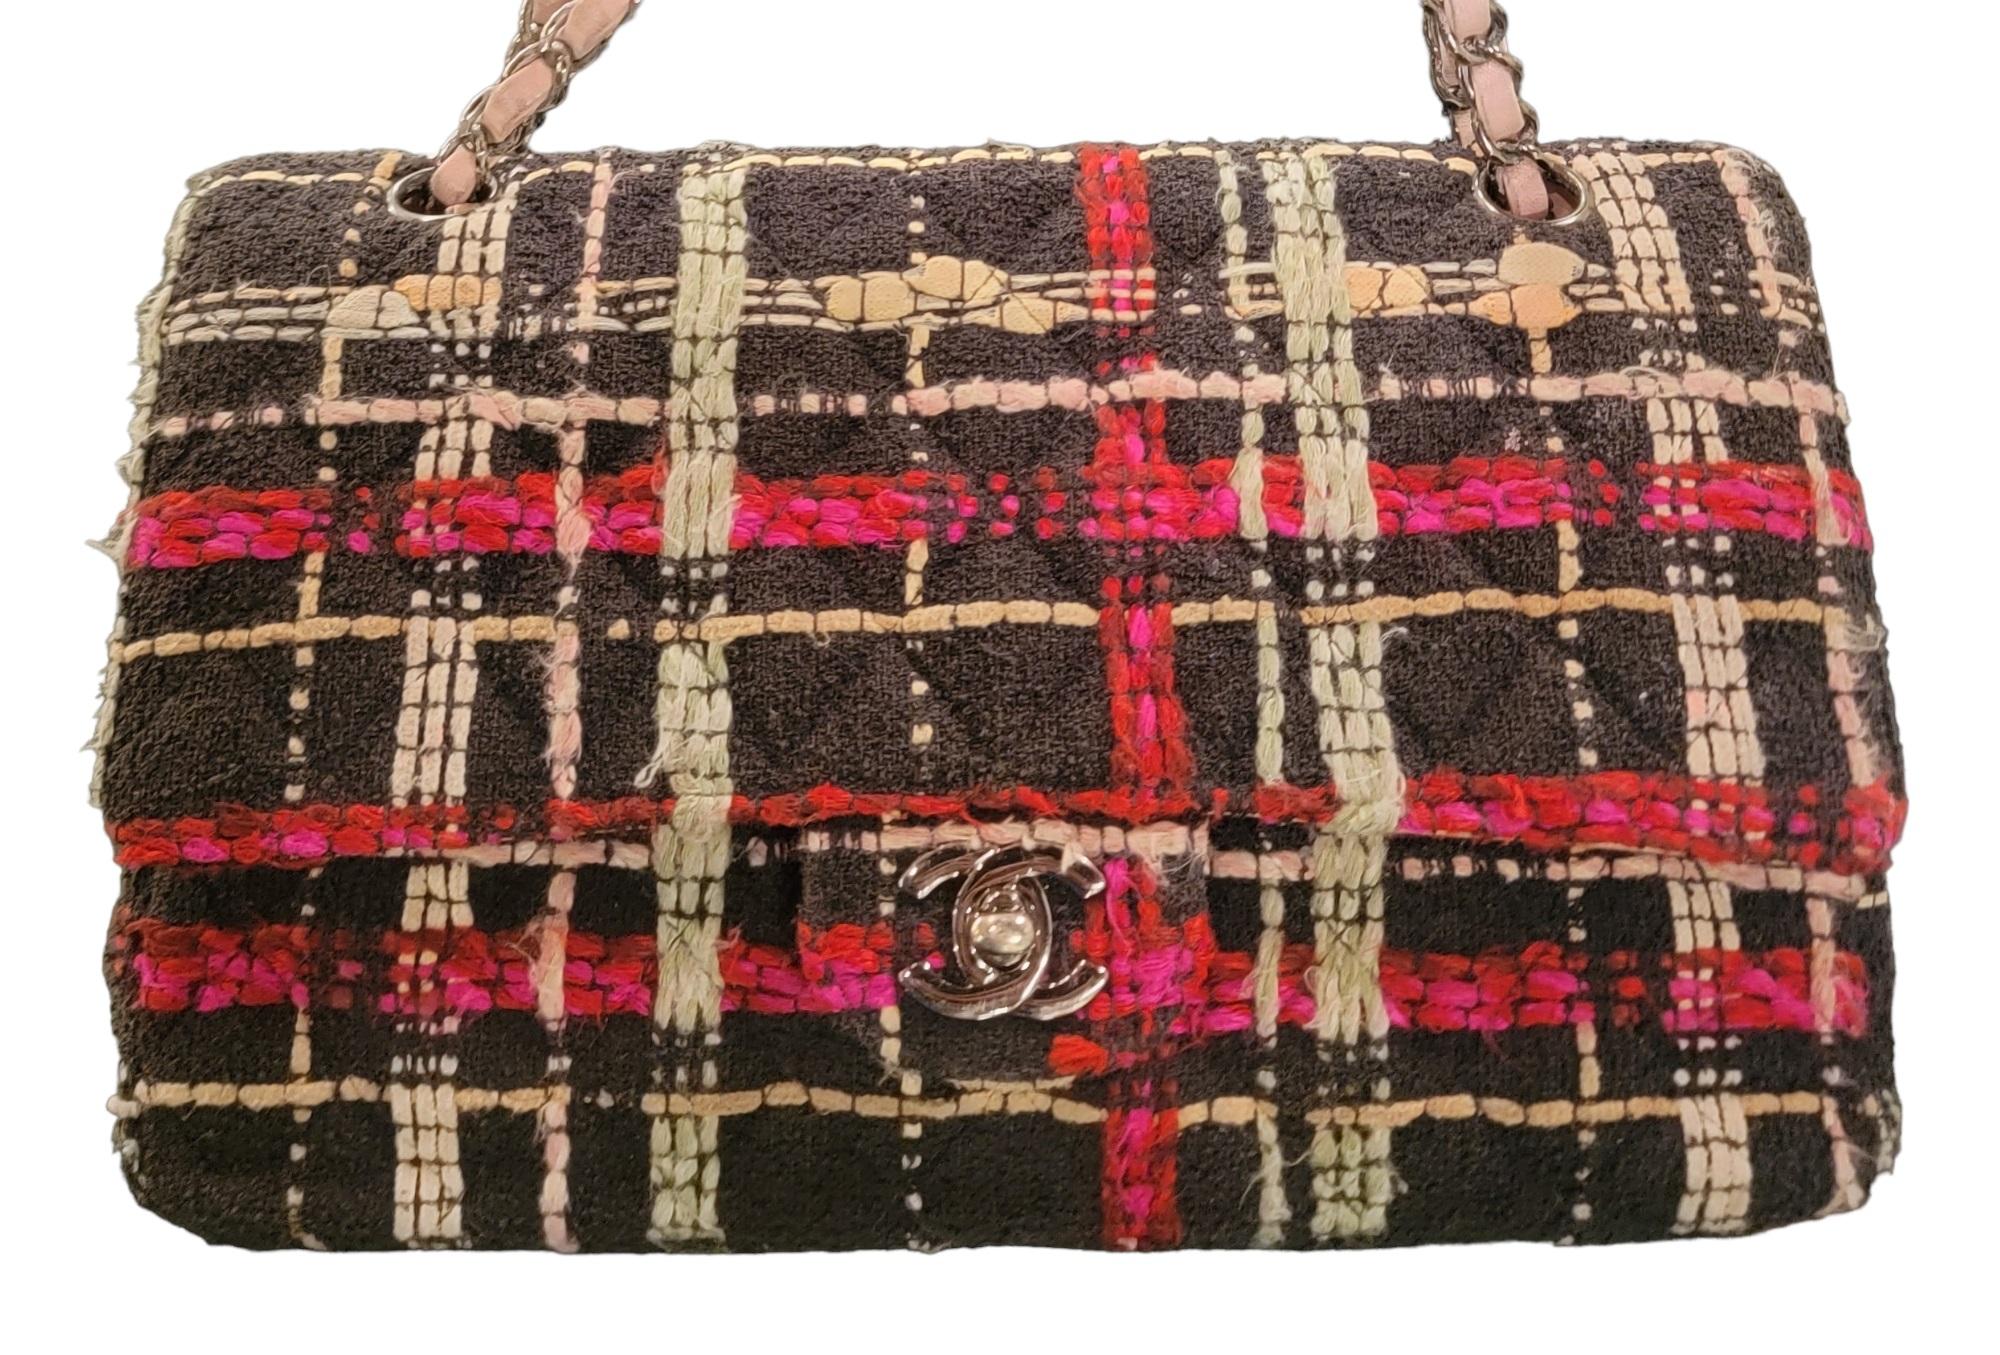 Auth Classic Chanel Runway Tweed Flap Bag For Sale 1